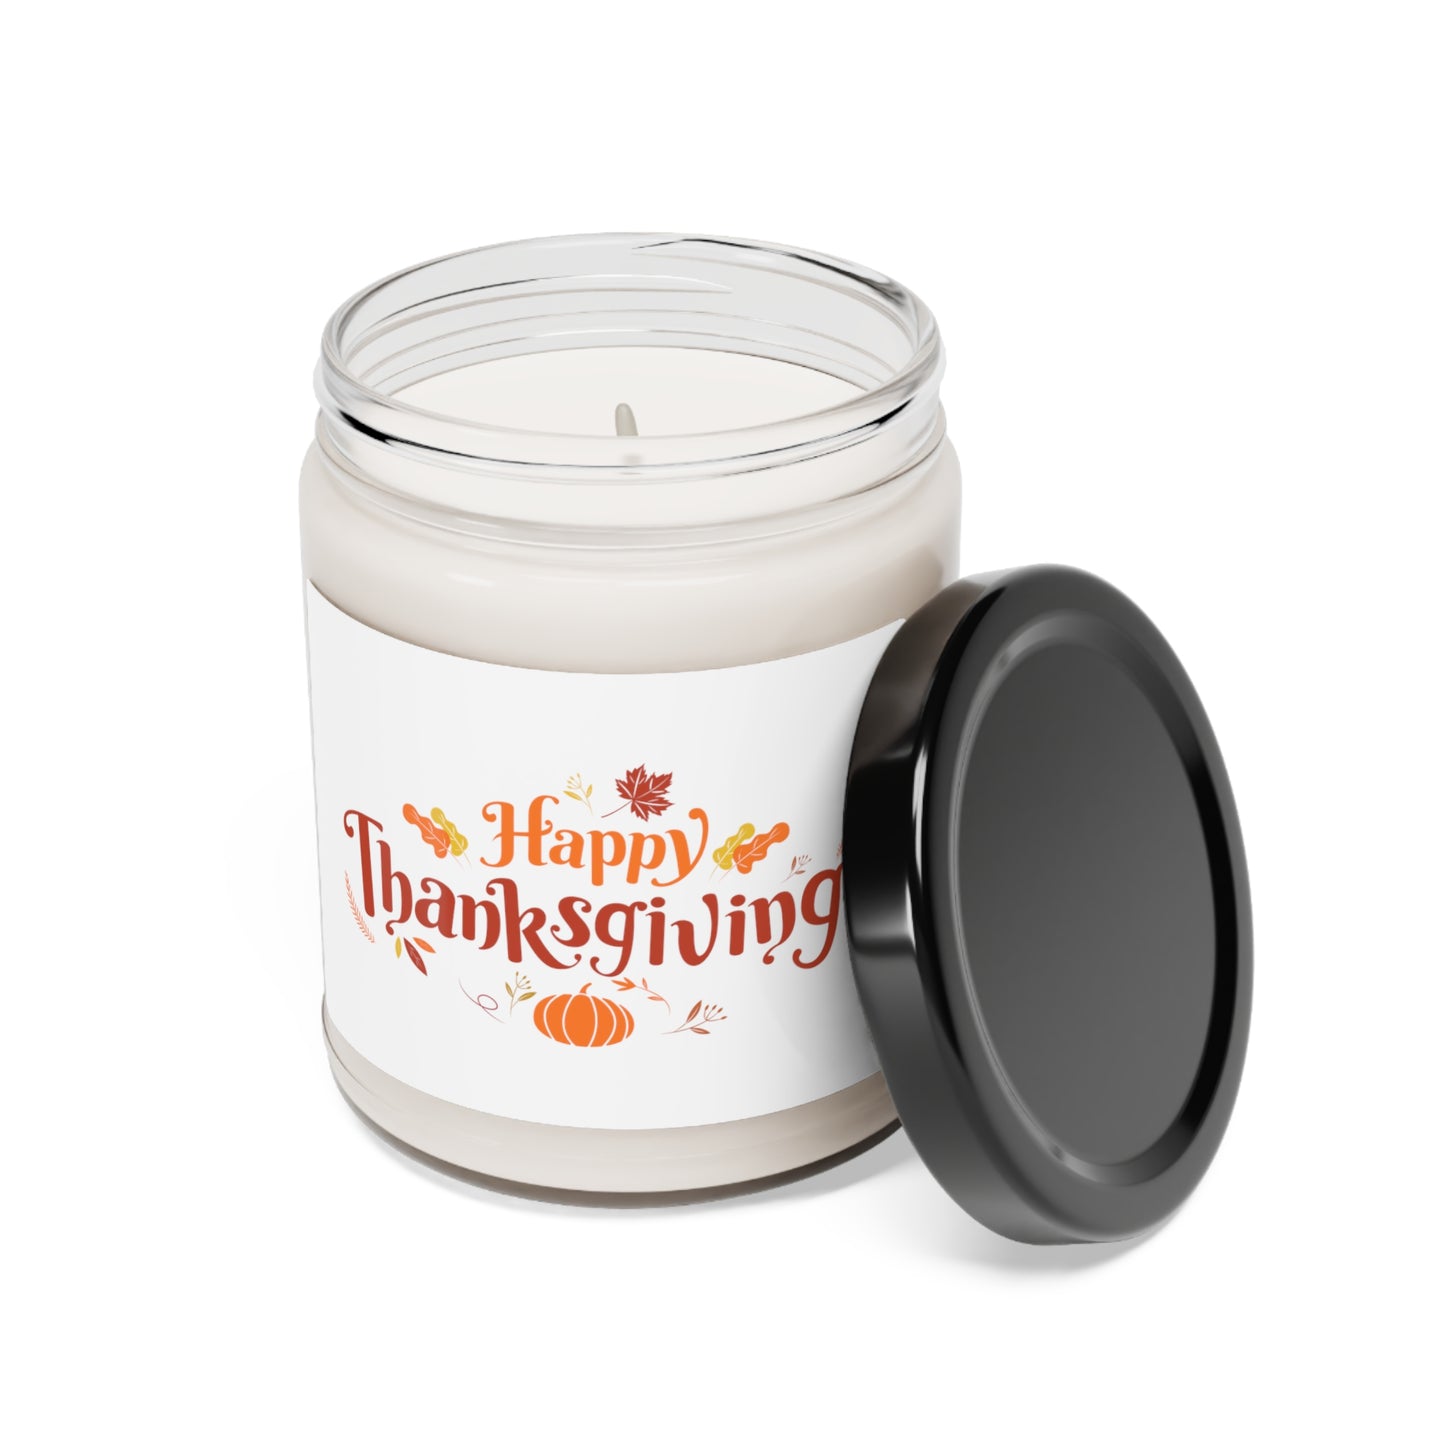 Happy Thanksgiving Scented Soy Candle 9oz